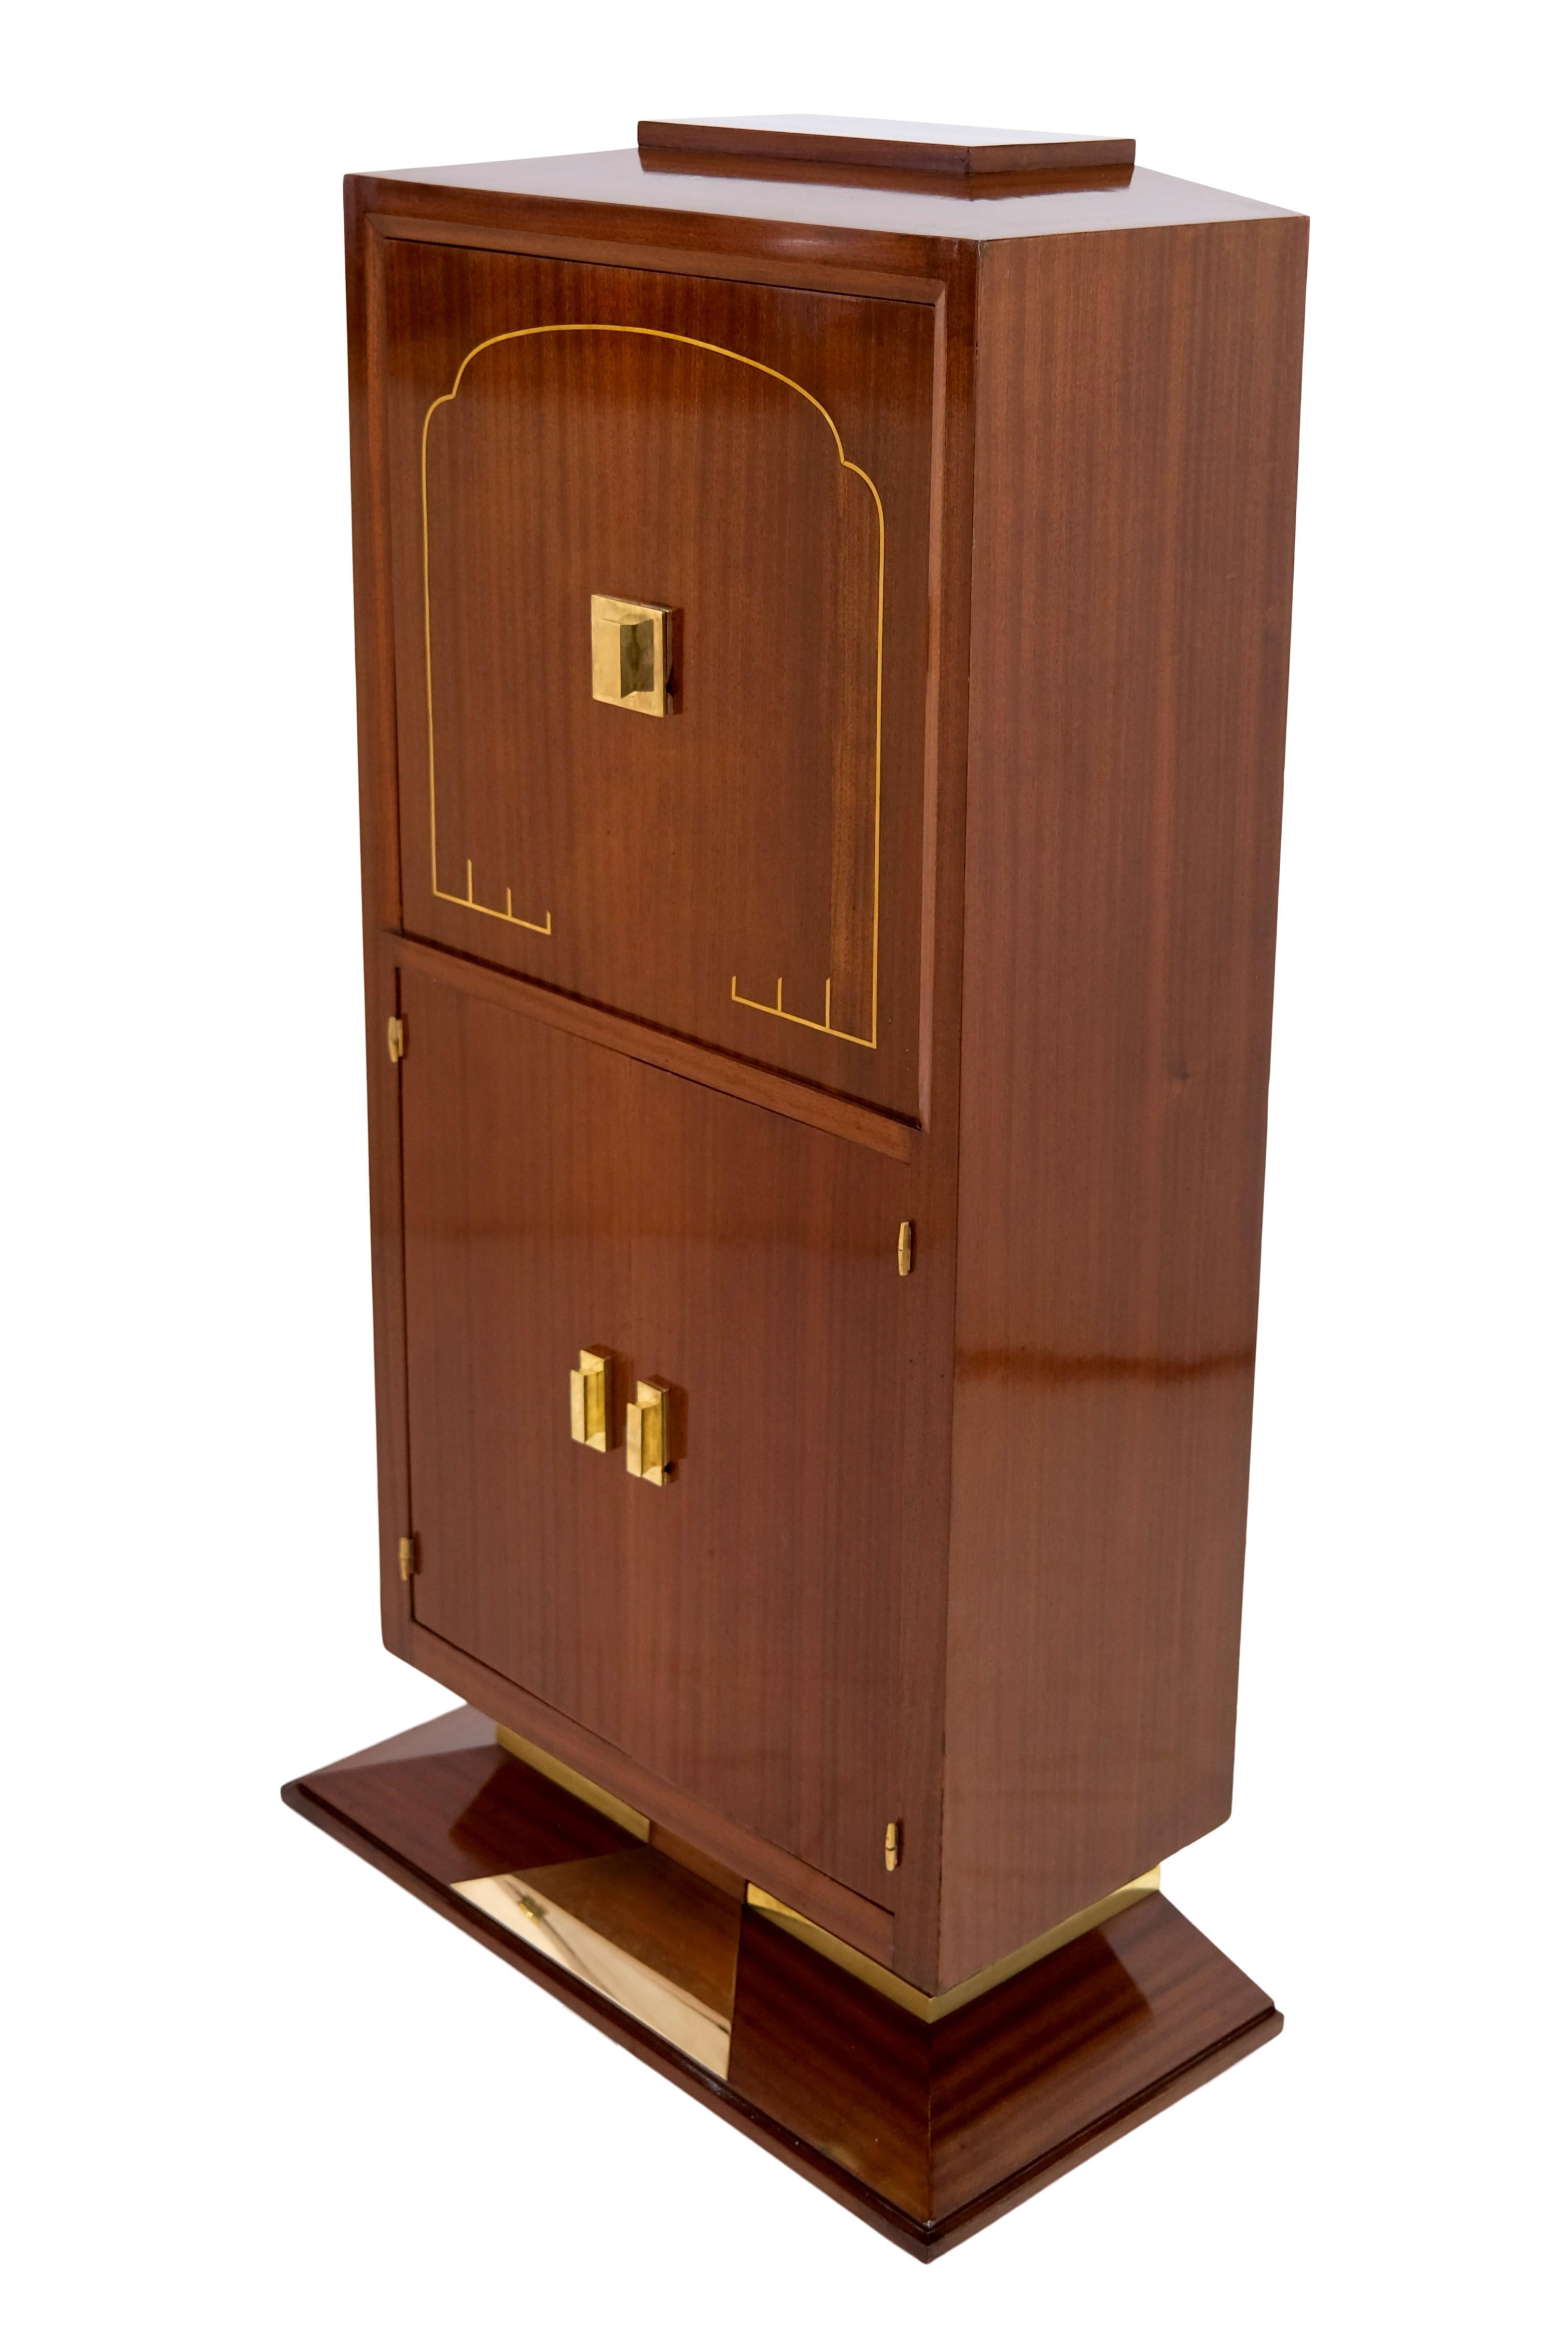 Mid-20th Century 1930's Art Deco Dominique Secretaire Desk with Keyhole in the Fitting